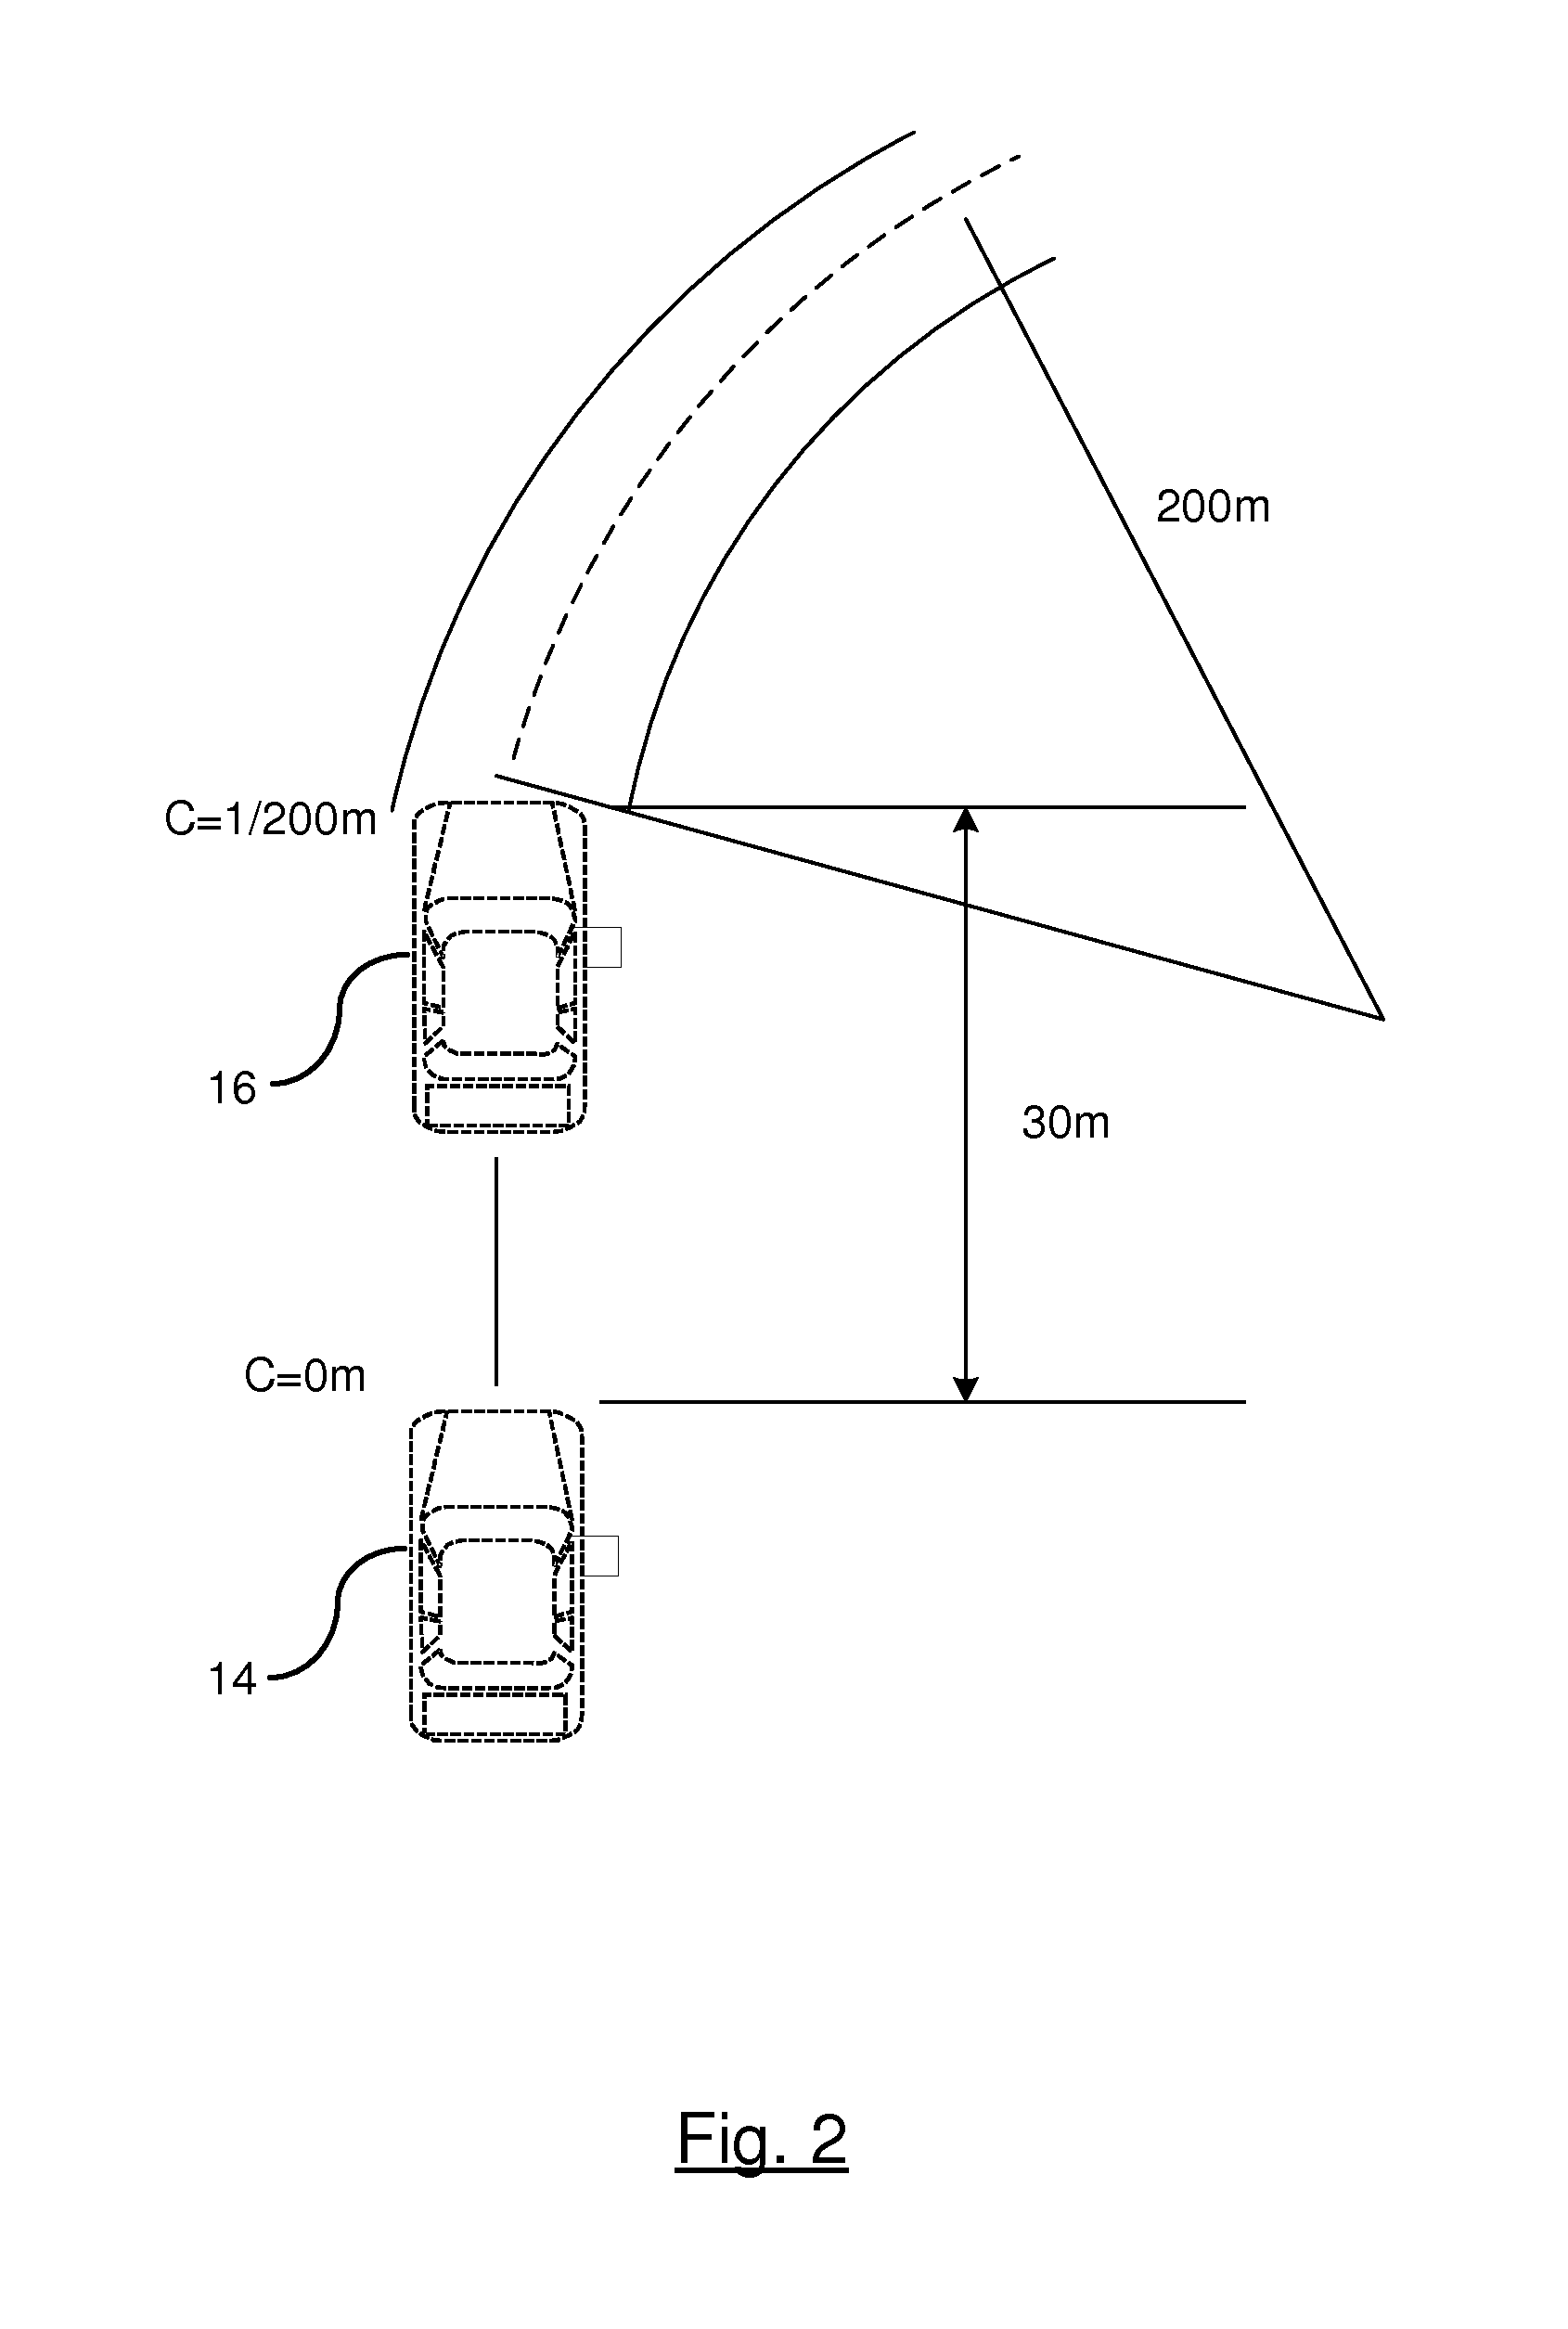 Sensor-aided vehicle positioning system